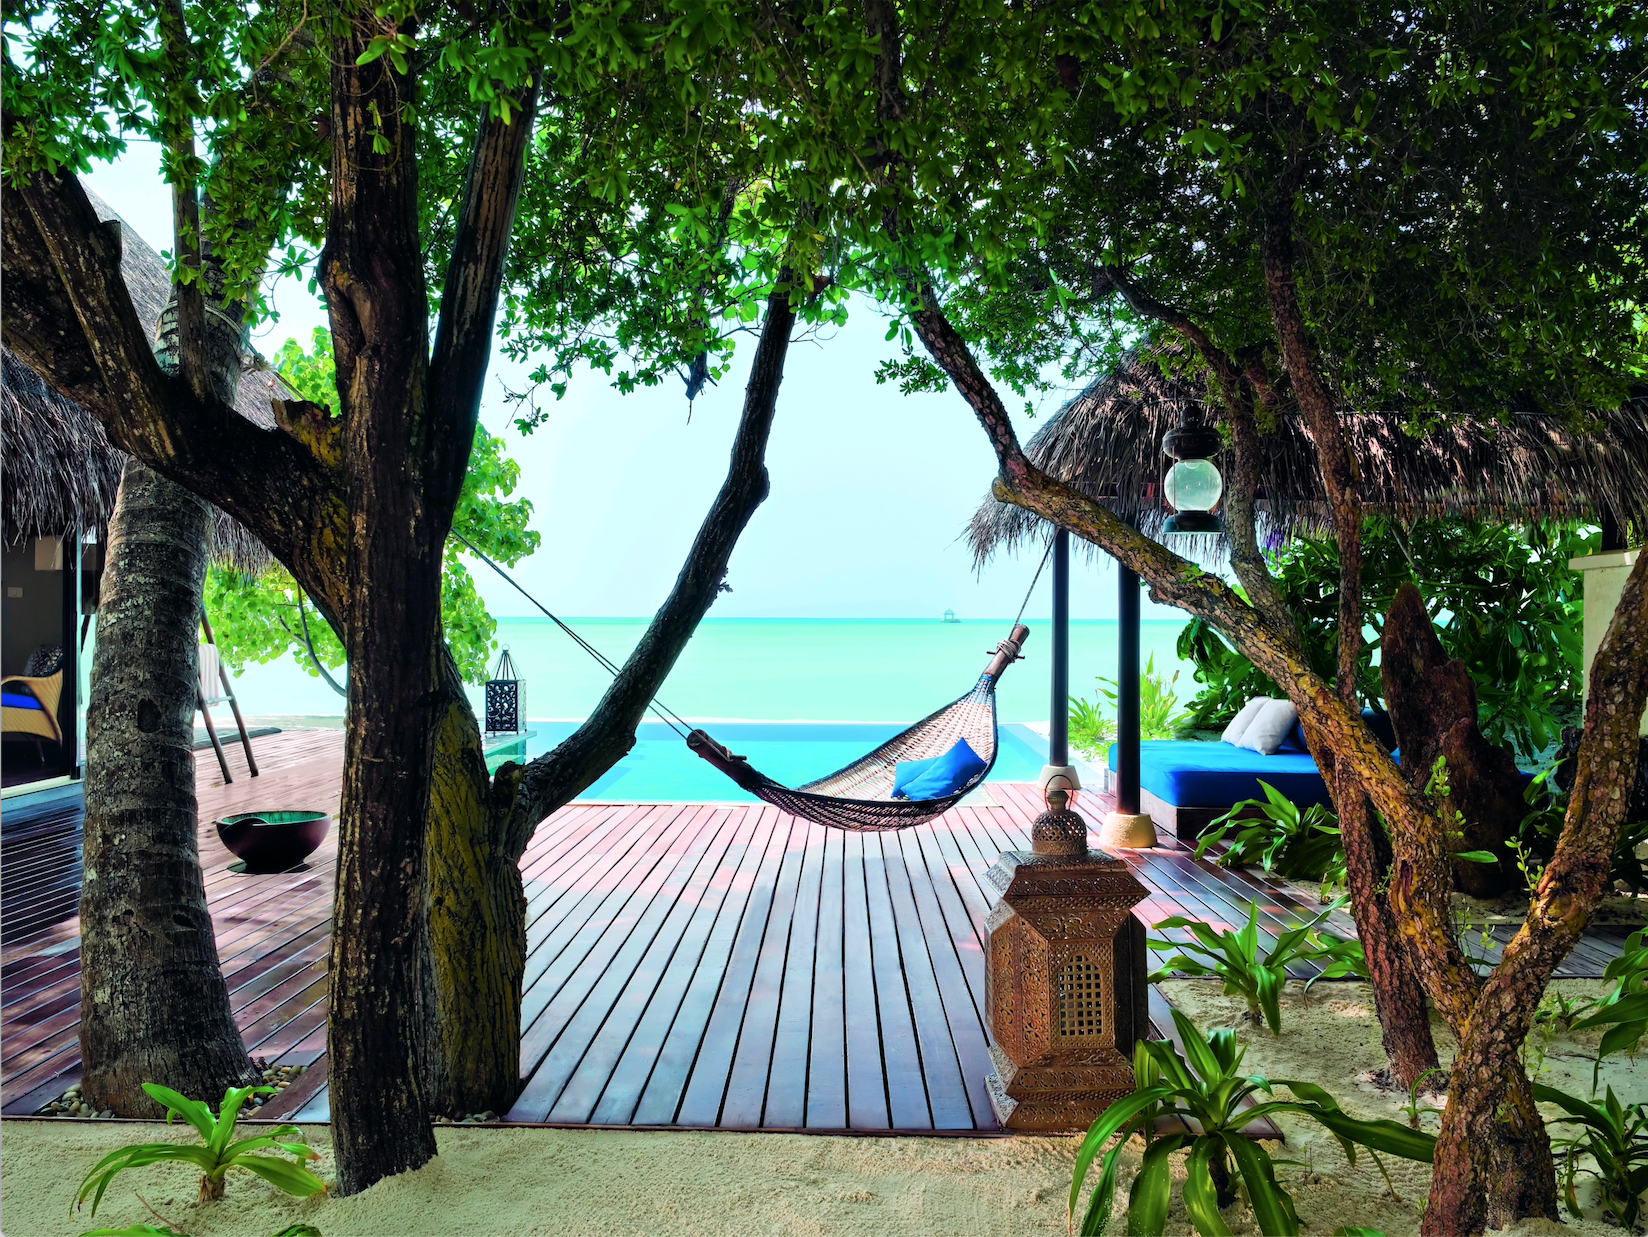   Picture yourself relaxing here at the Taj Exotica (photo credit: Taj Hotels)  